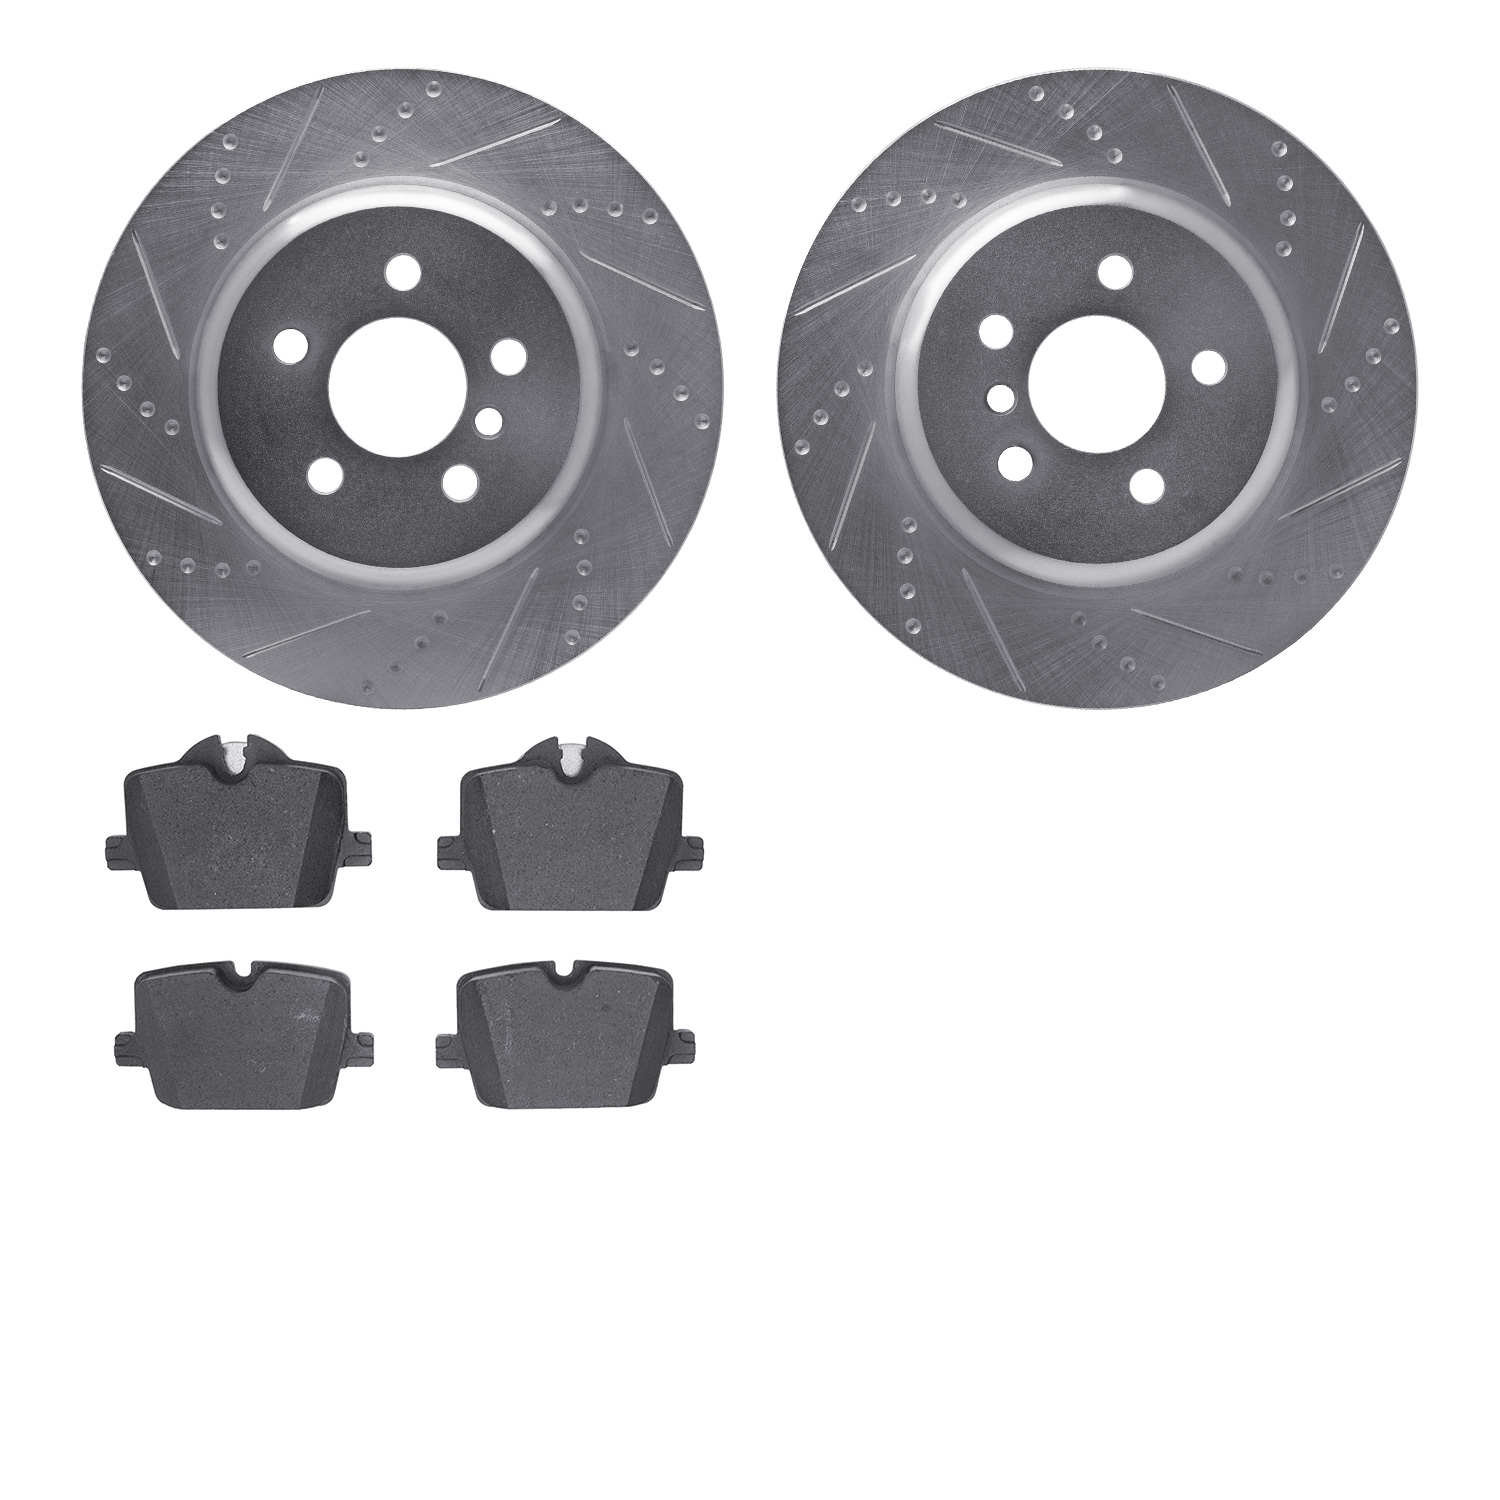 7502-31162 Drilled/Slotted Brake Rotors w/5000 Advanced Brake Pads Kit [Silver], Fits Select Multiple Makes/Models, Position: Re